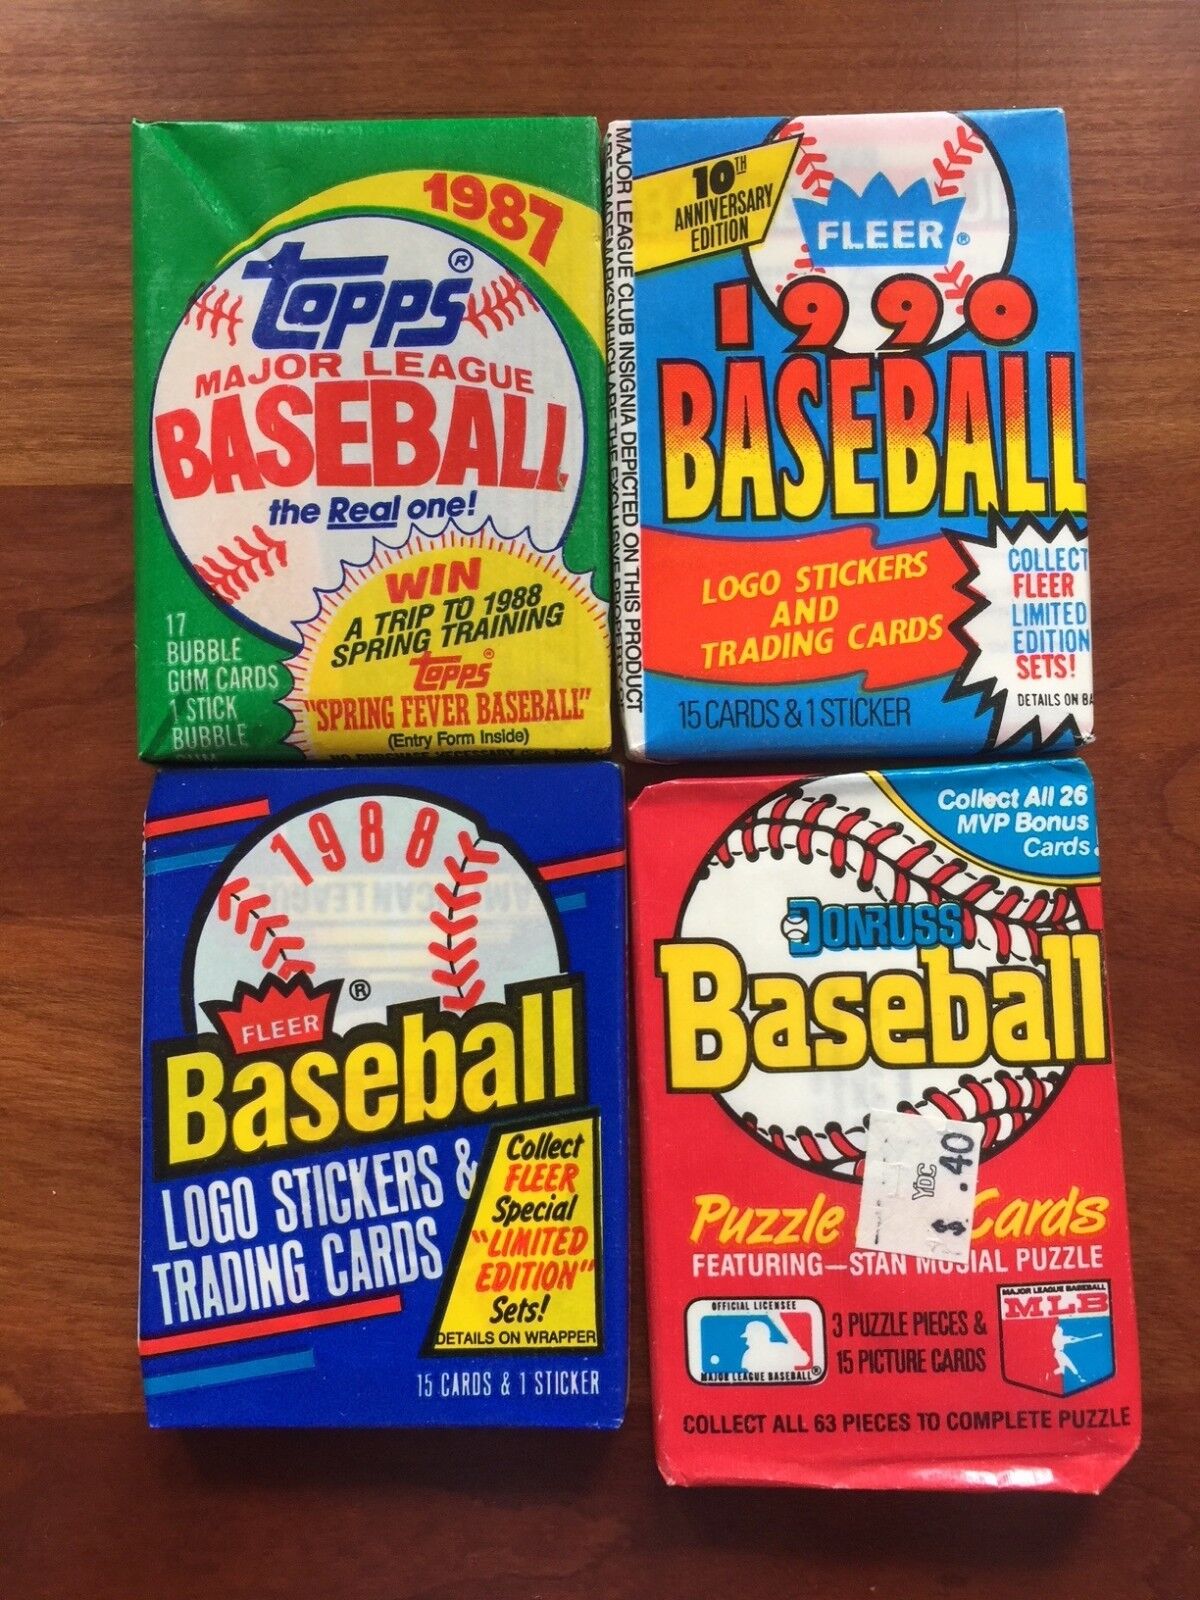 LIQUIDATION SALE OF 1511 OLD UNOPENED BASEBALL CARDS IN PACKS 1990 AND EARLIER